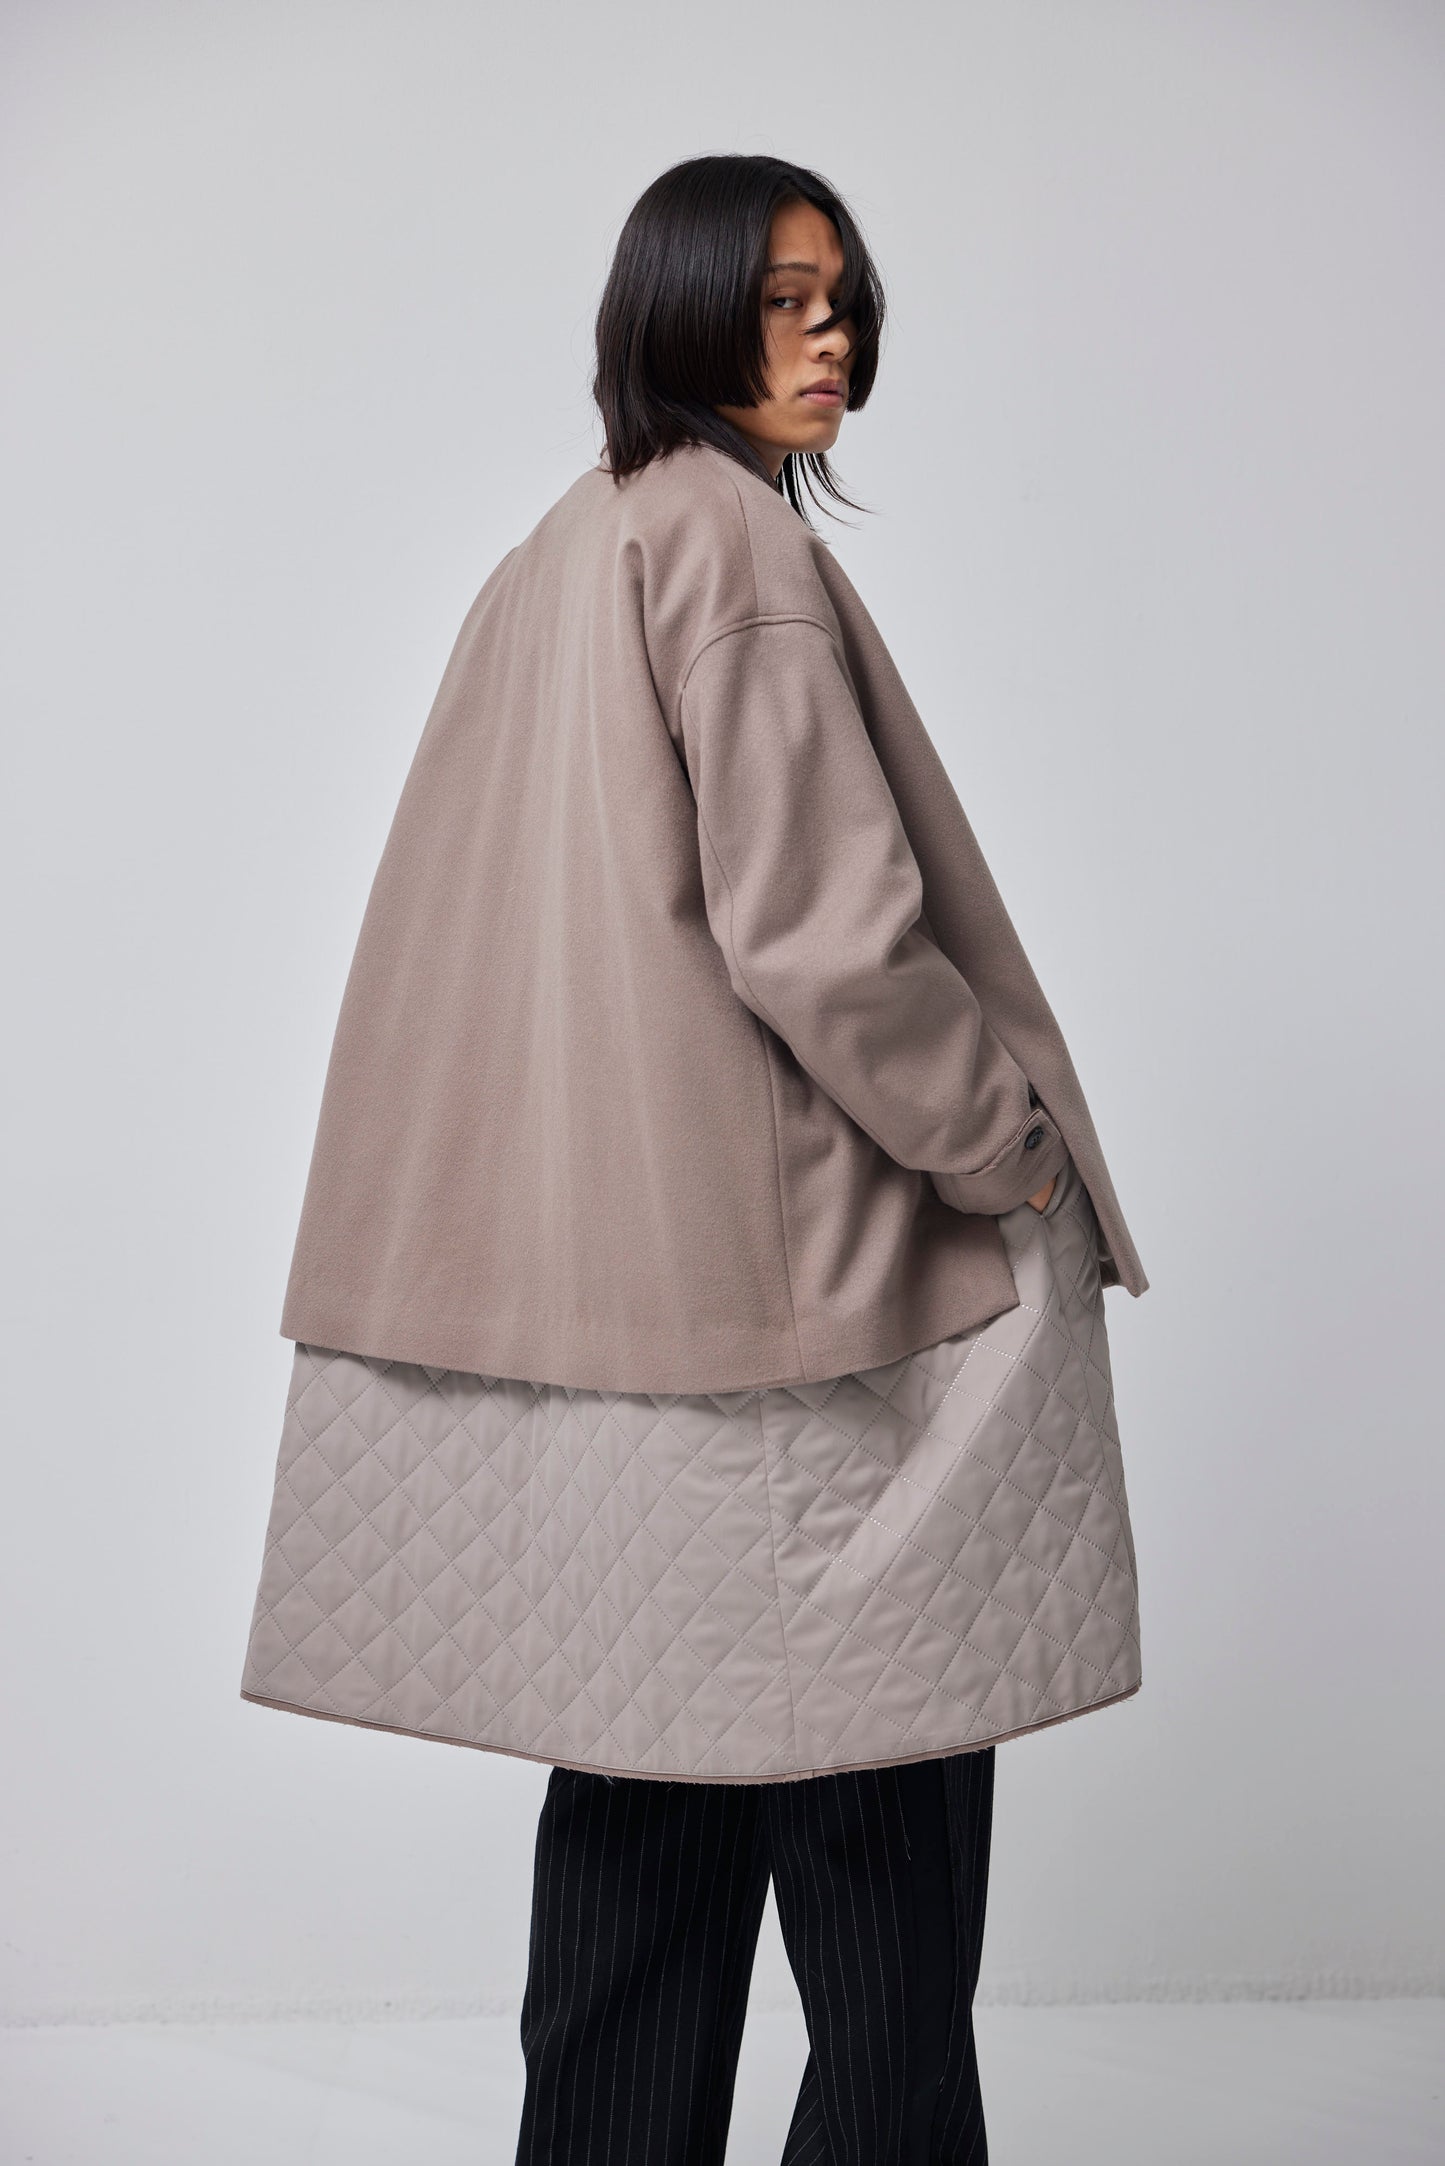 LB23AW-CO01-SSM | Pinsonic Separable 3WAY Chester Coat | WOOD 